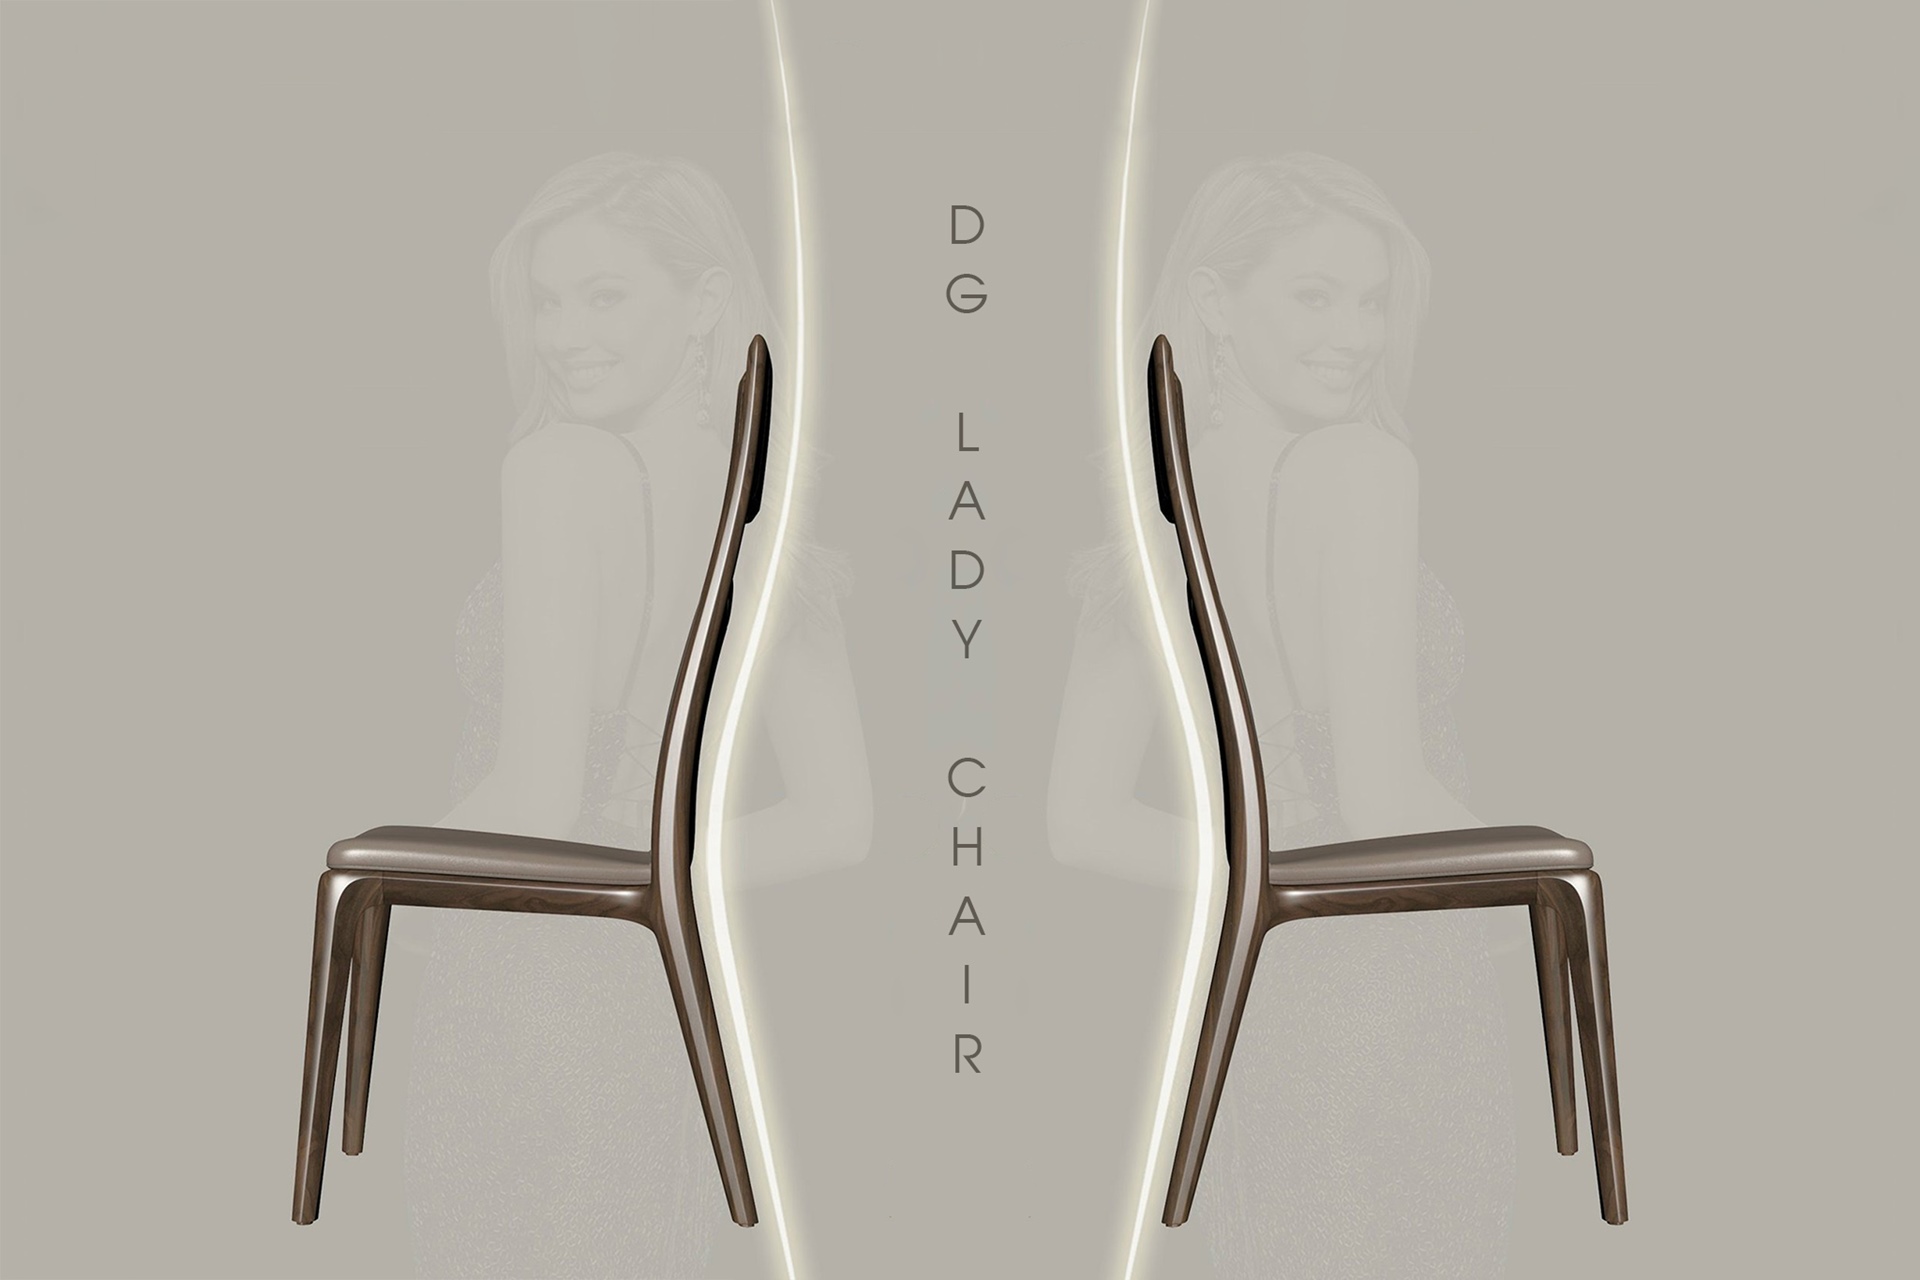 dg lady chair by donggia (7)